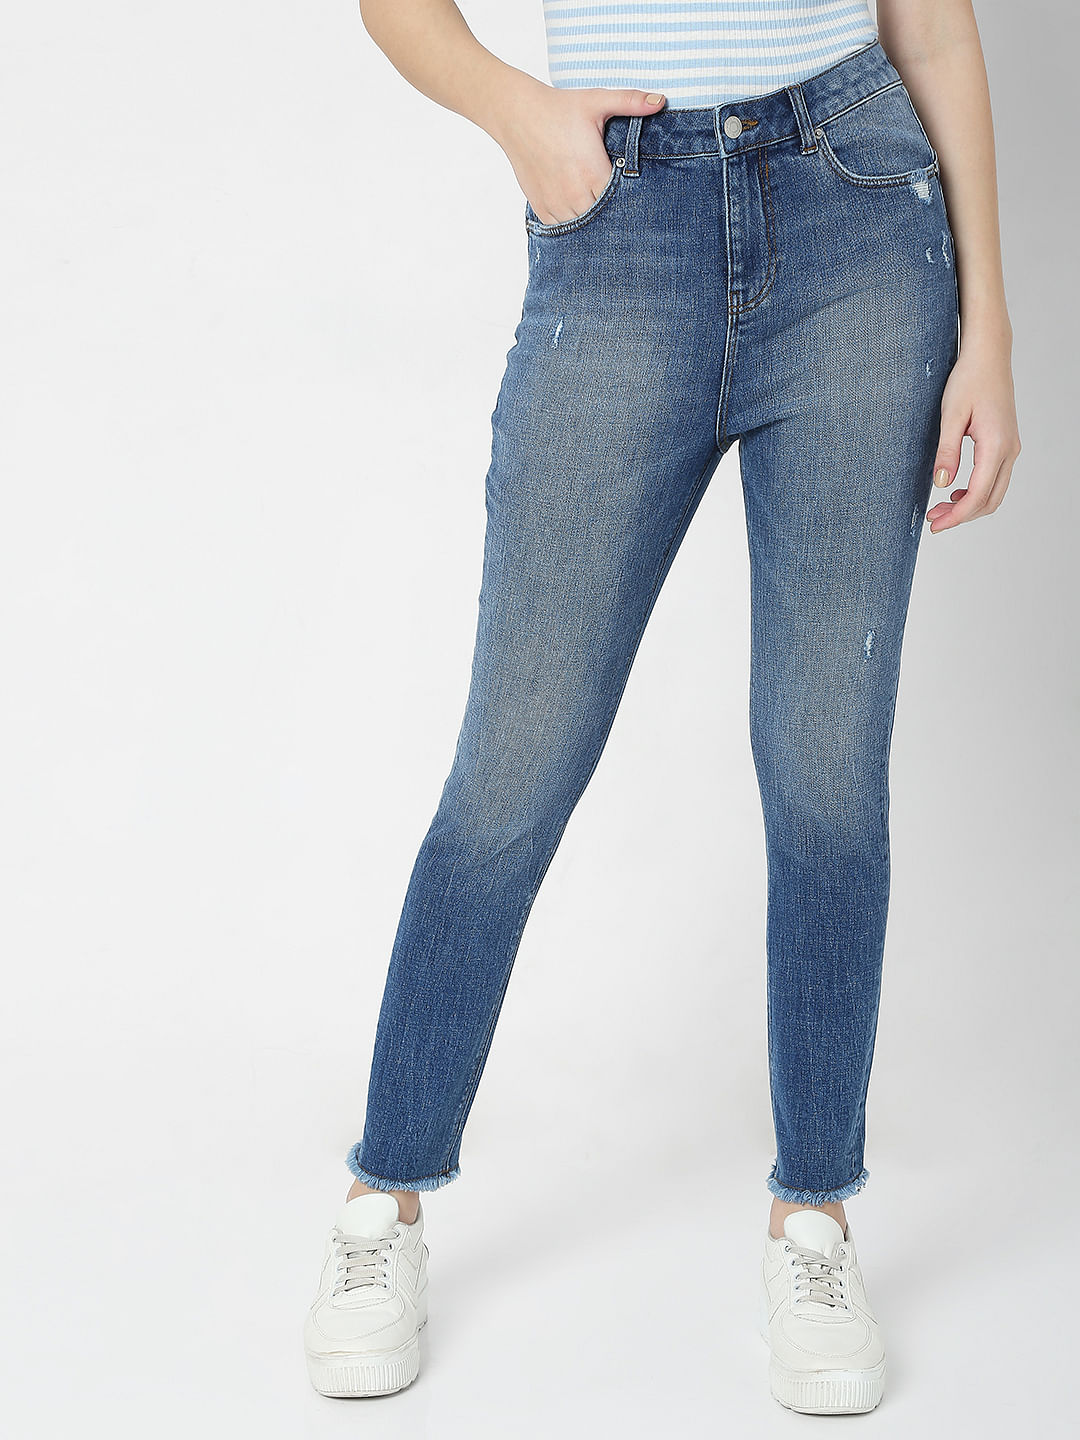 Guess Jeggings & Skinny & Slim Blue WOMEN FASHION Jeans Ripped discount 74% 